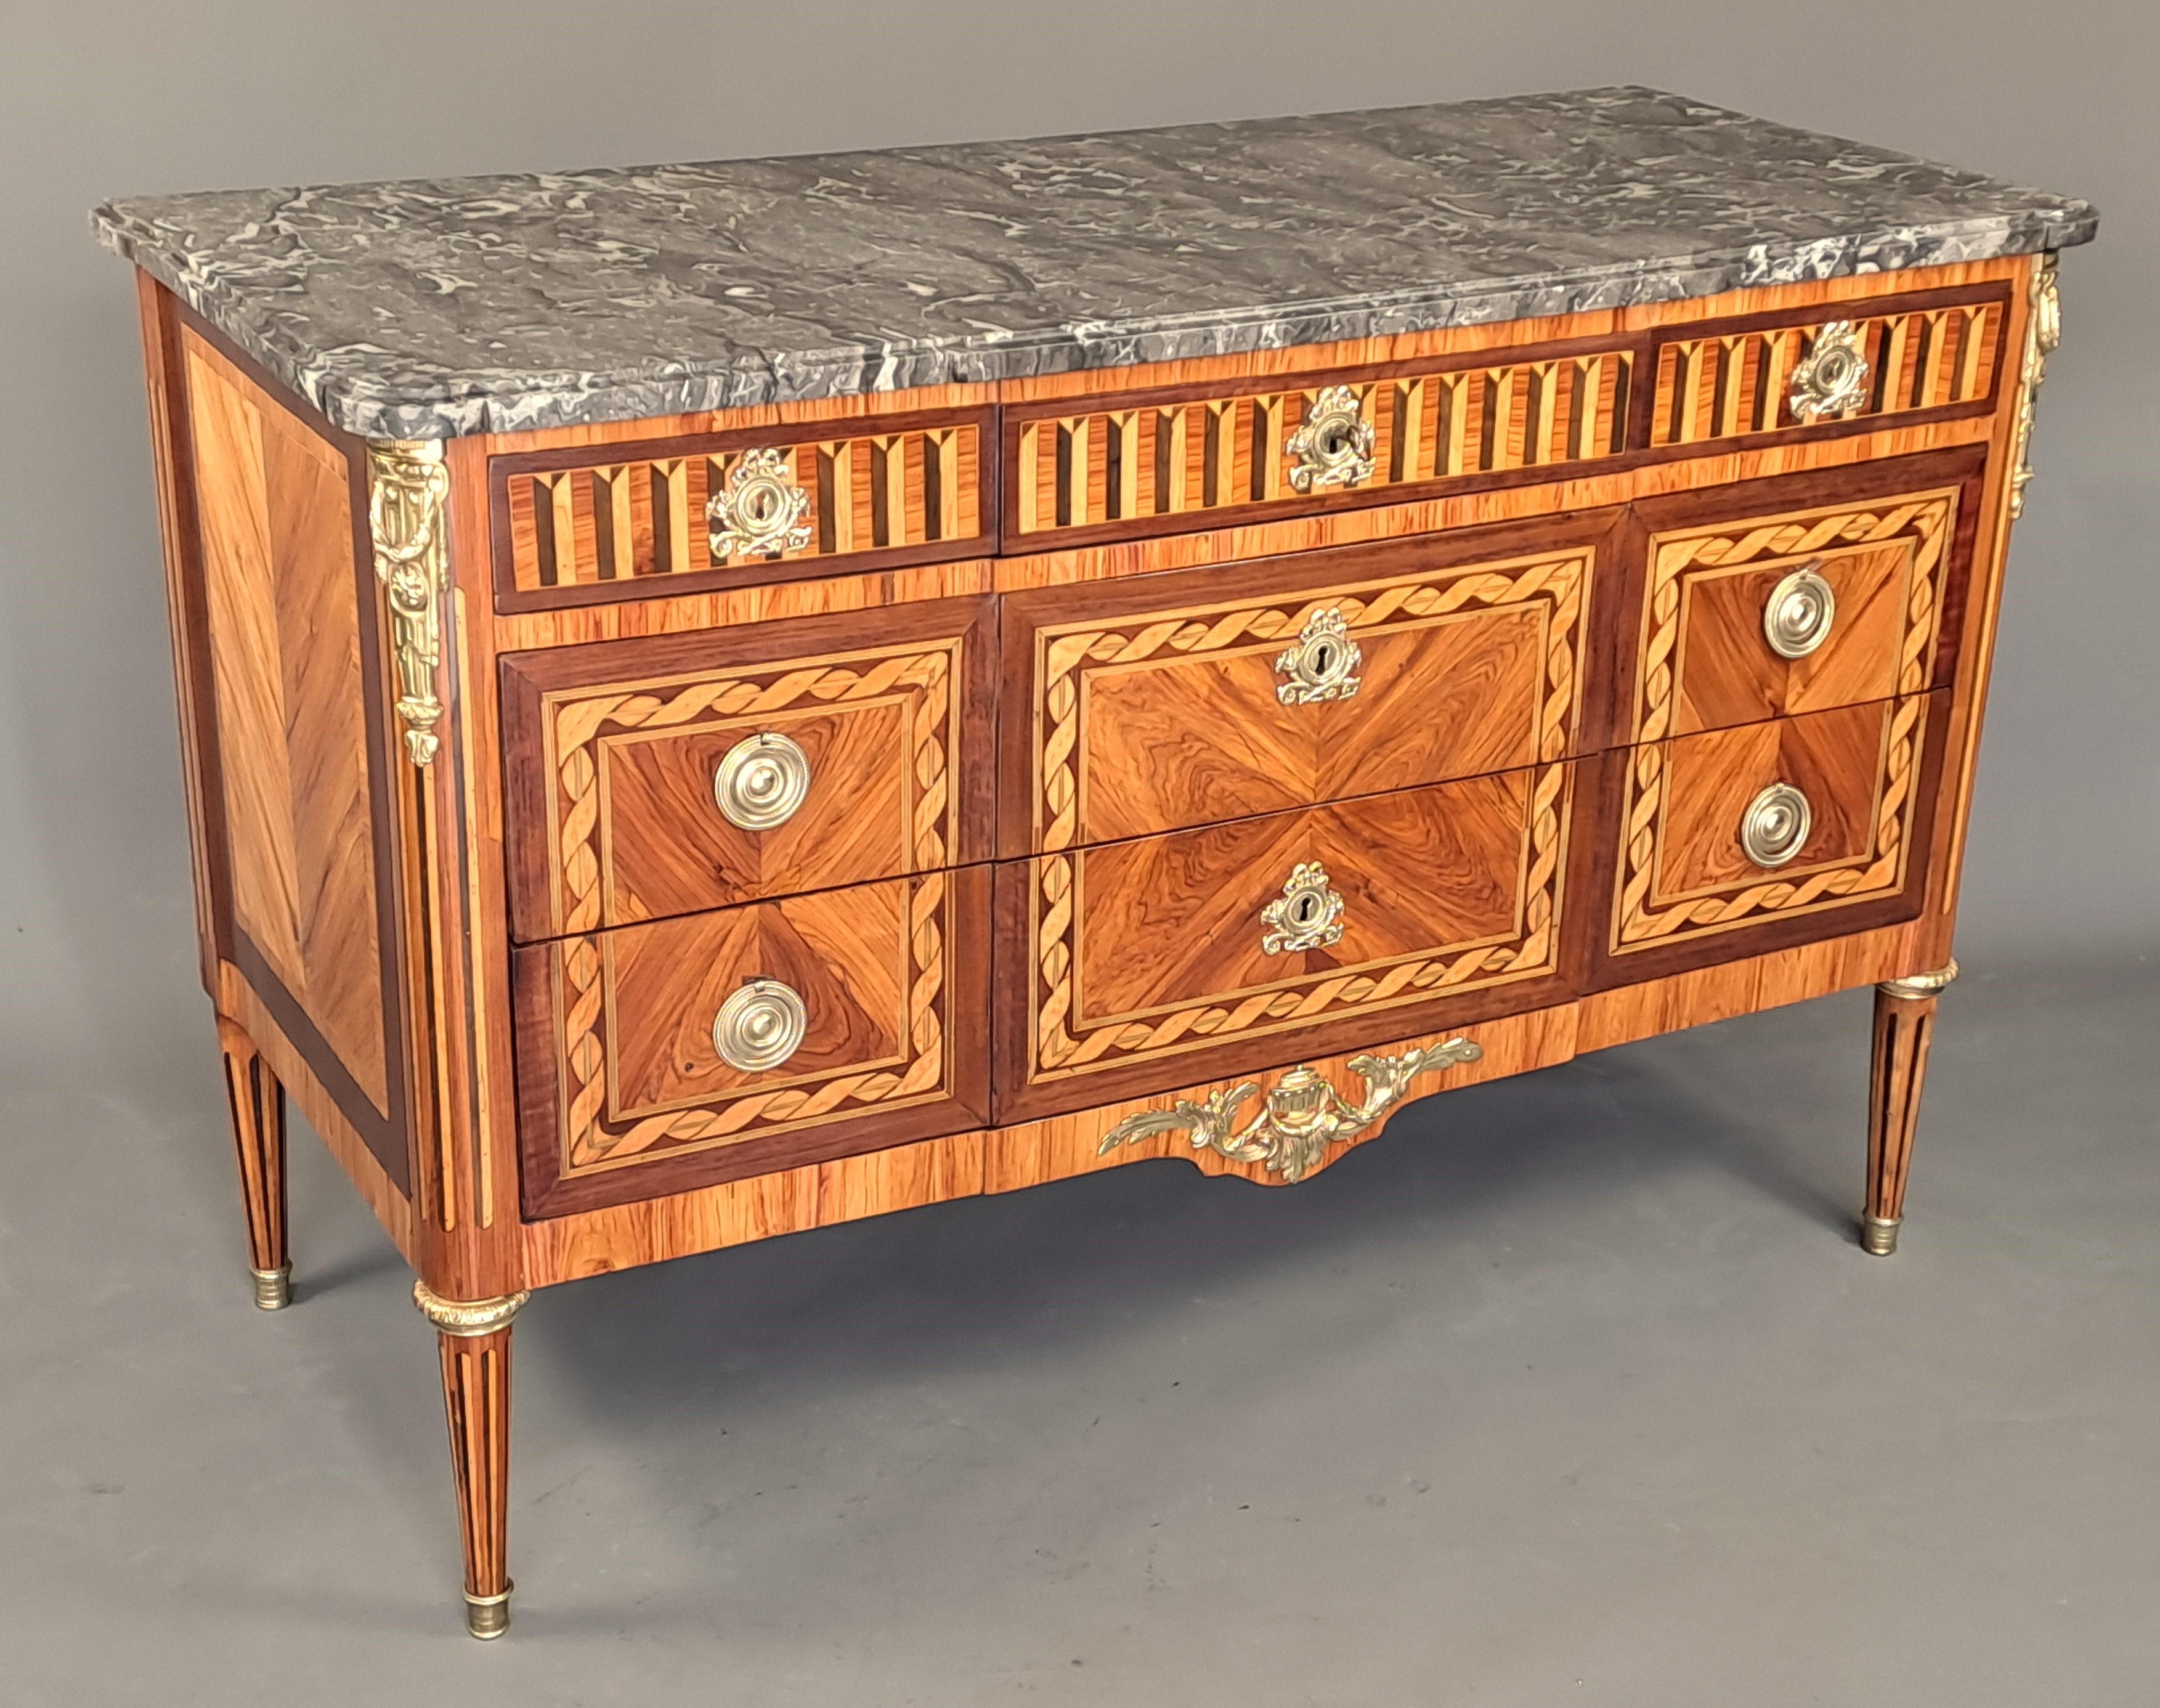 Nicolas Virrig - Paris - Master April 11, 1781

Important Louis XVI chest of drawers with central projection in marquetry presenting on the front reserves in rosewood treated as butterfly wings and delimited by superb friezes simulating a ribbon